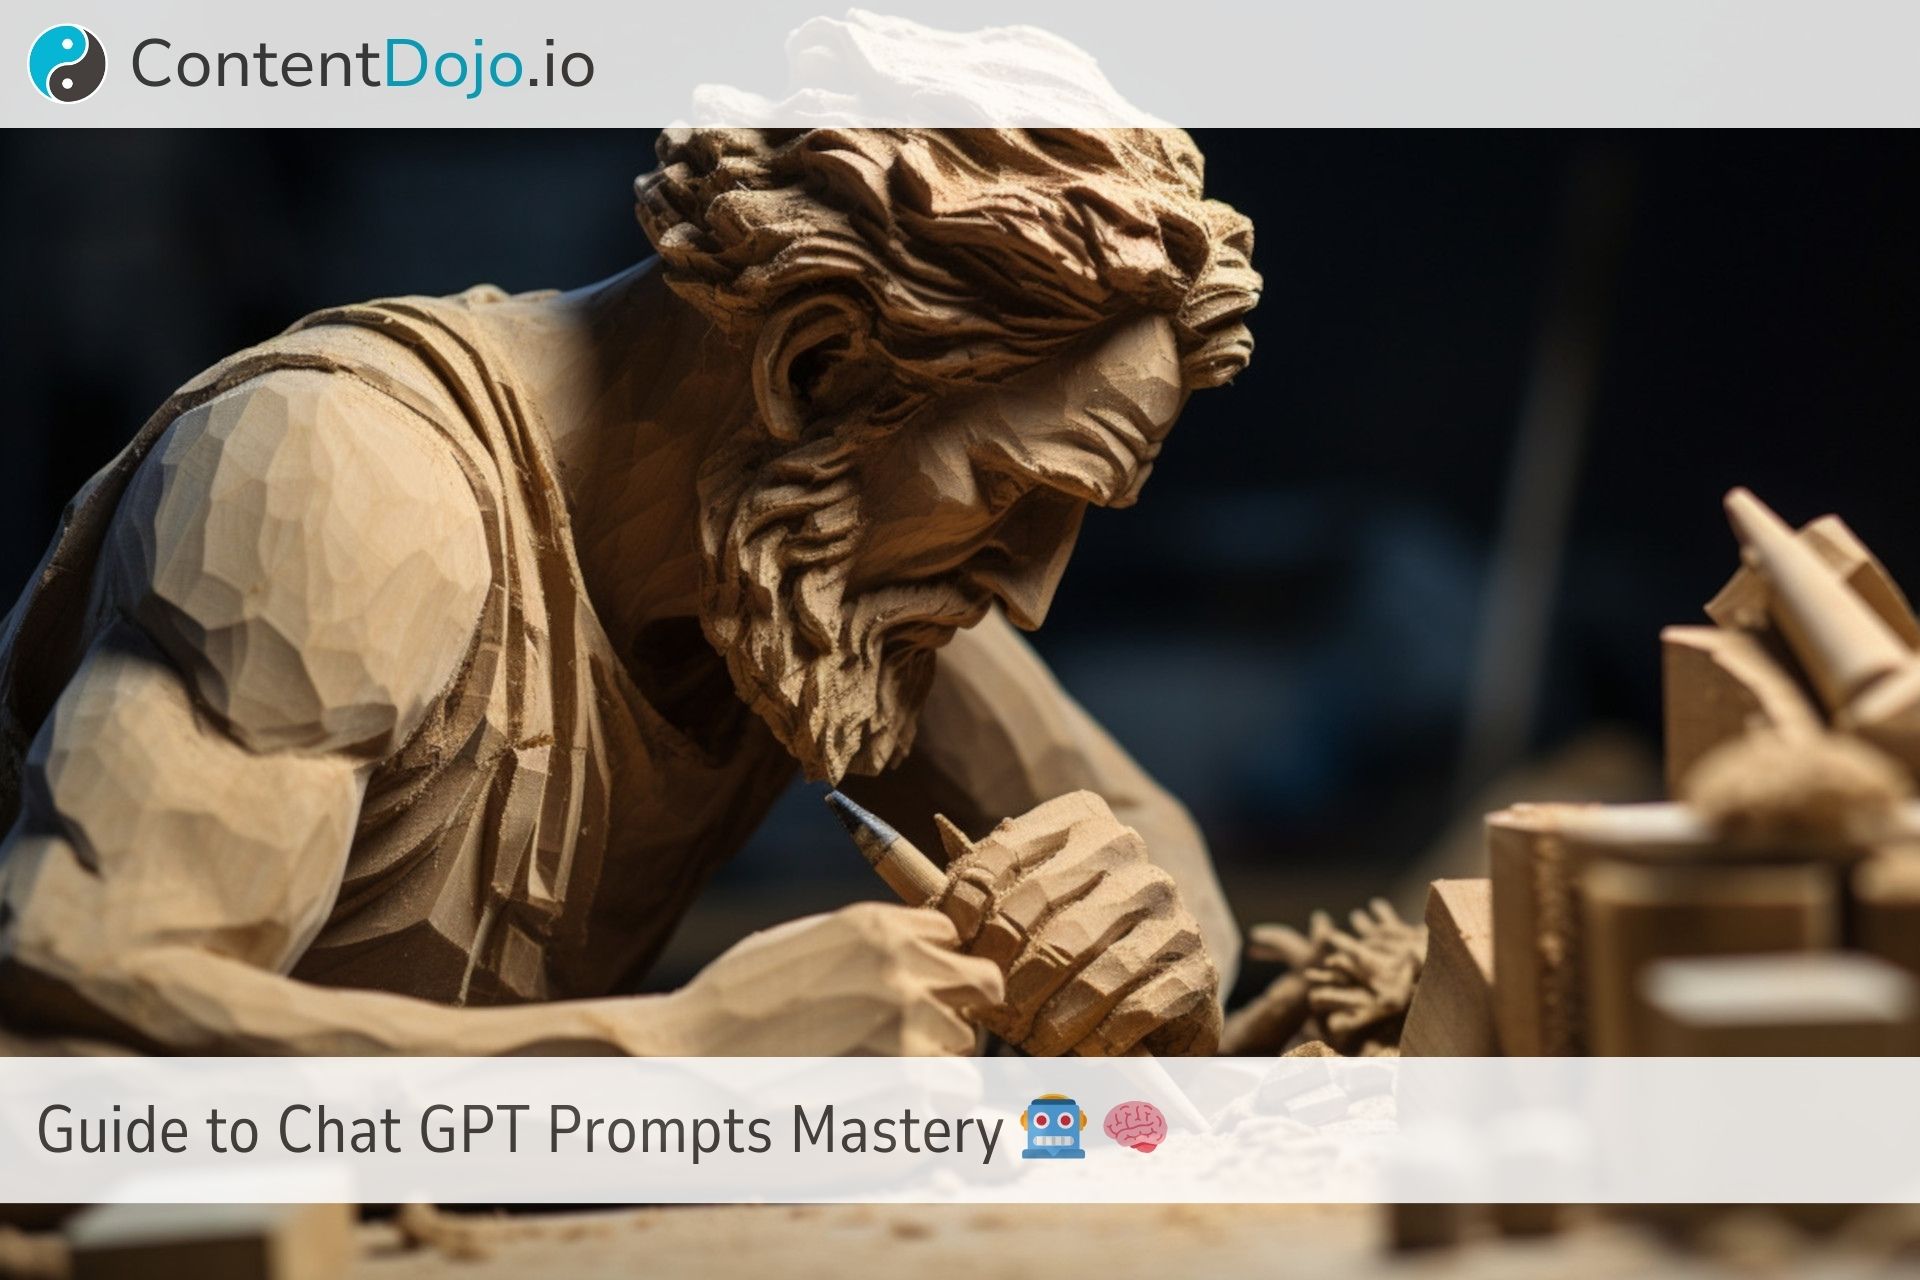 Guide to Chat GPT Prompts Mastery